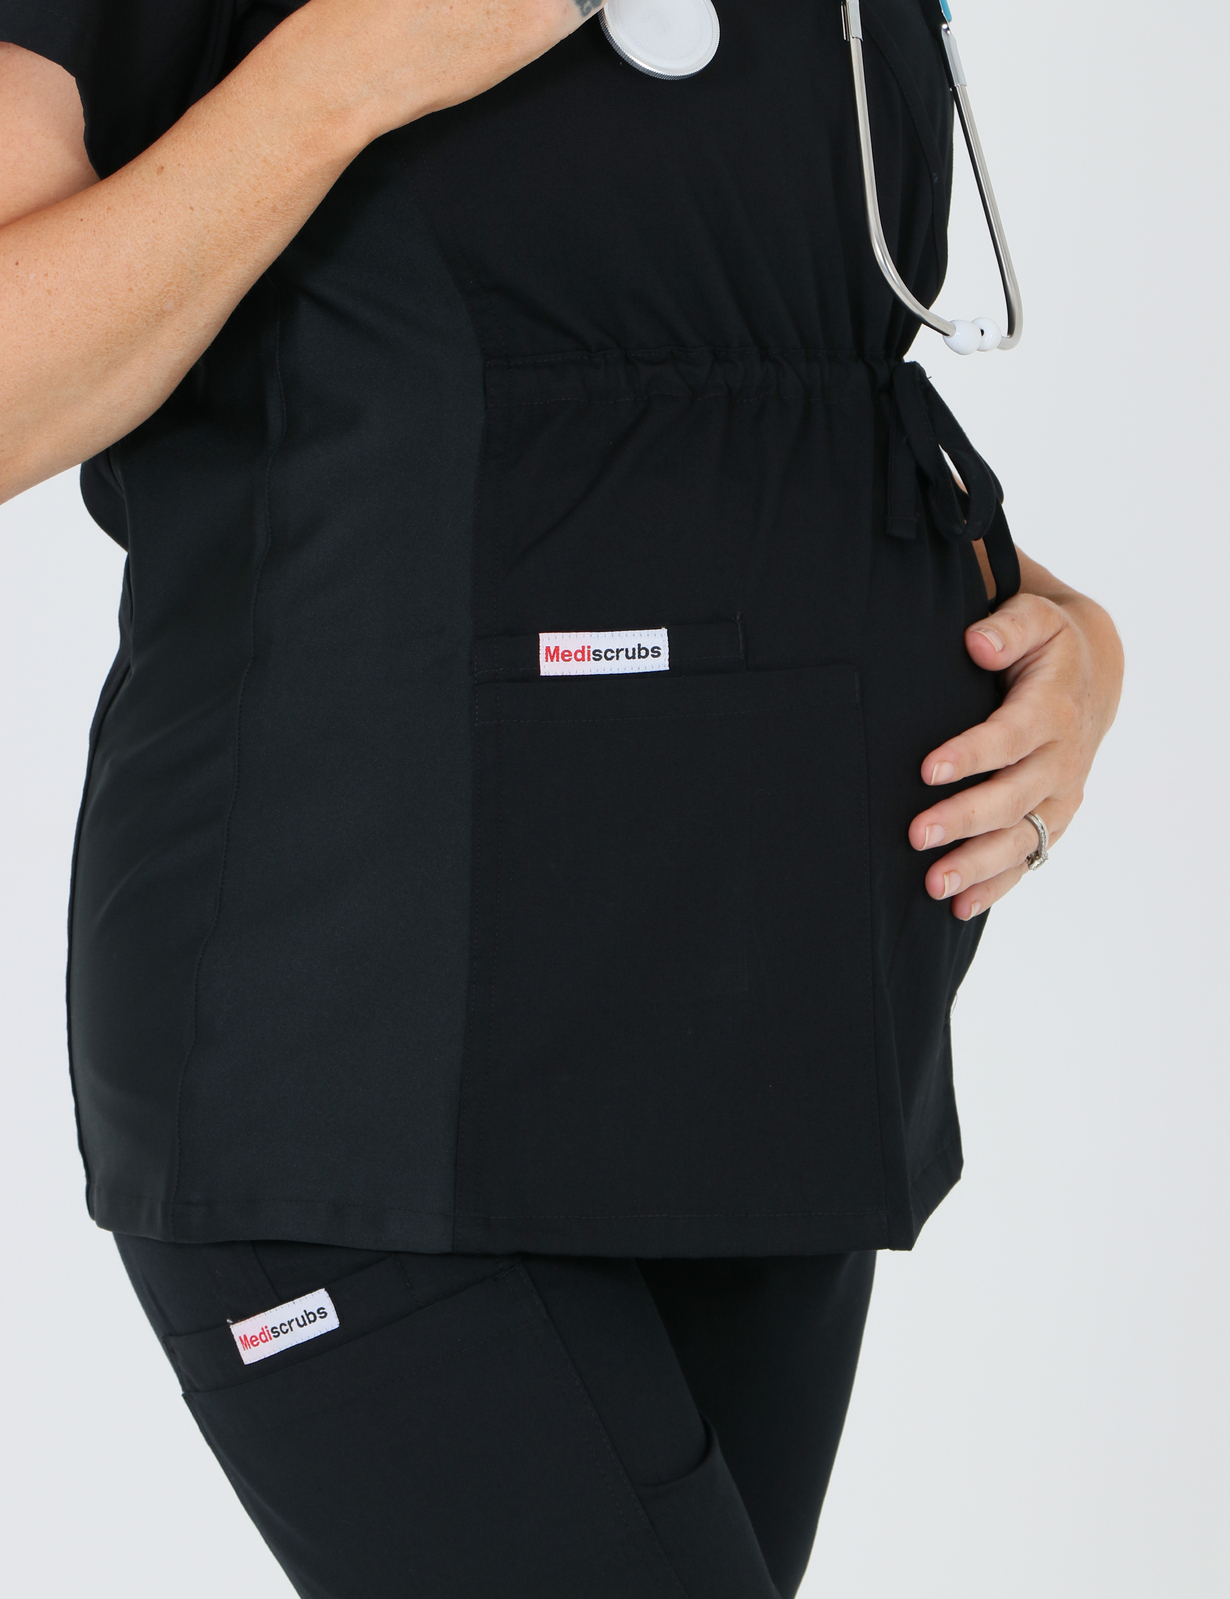 North Shore Private Hospital Radiographer Uniform Top Only Bundle ( Maternity Spandex Top in Black + Logo)